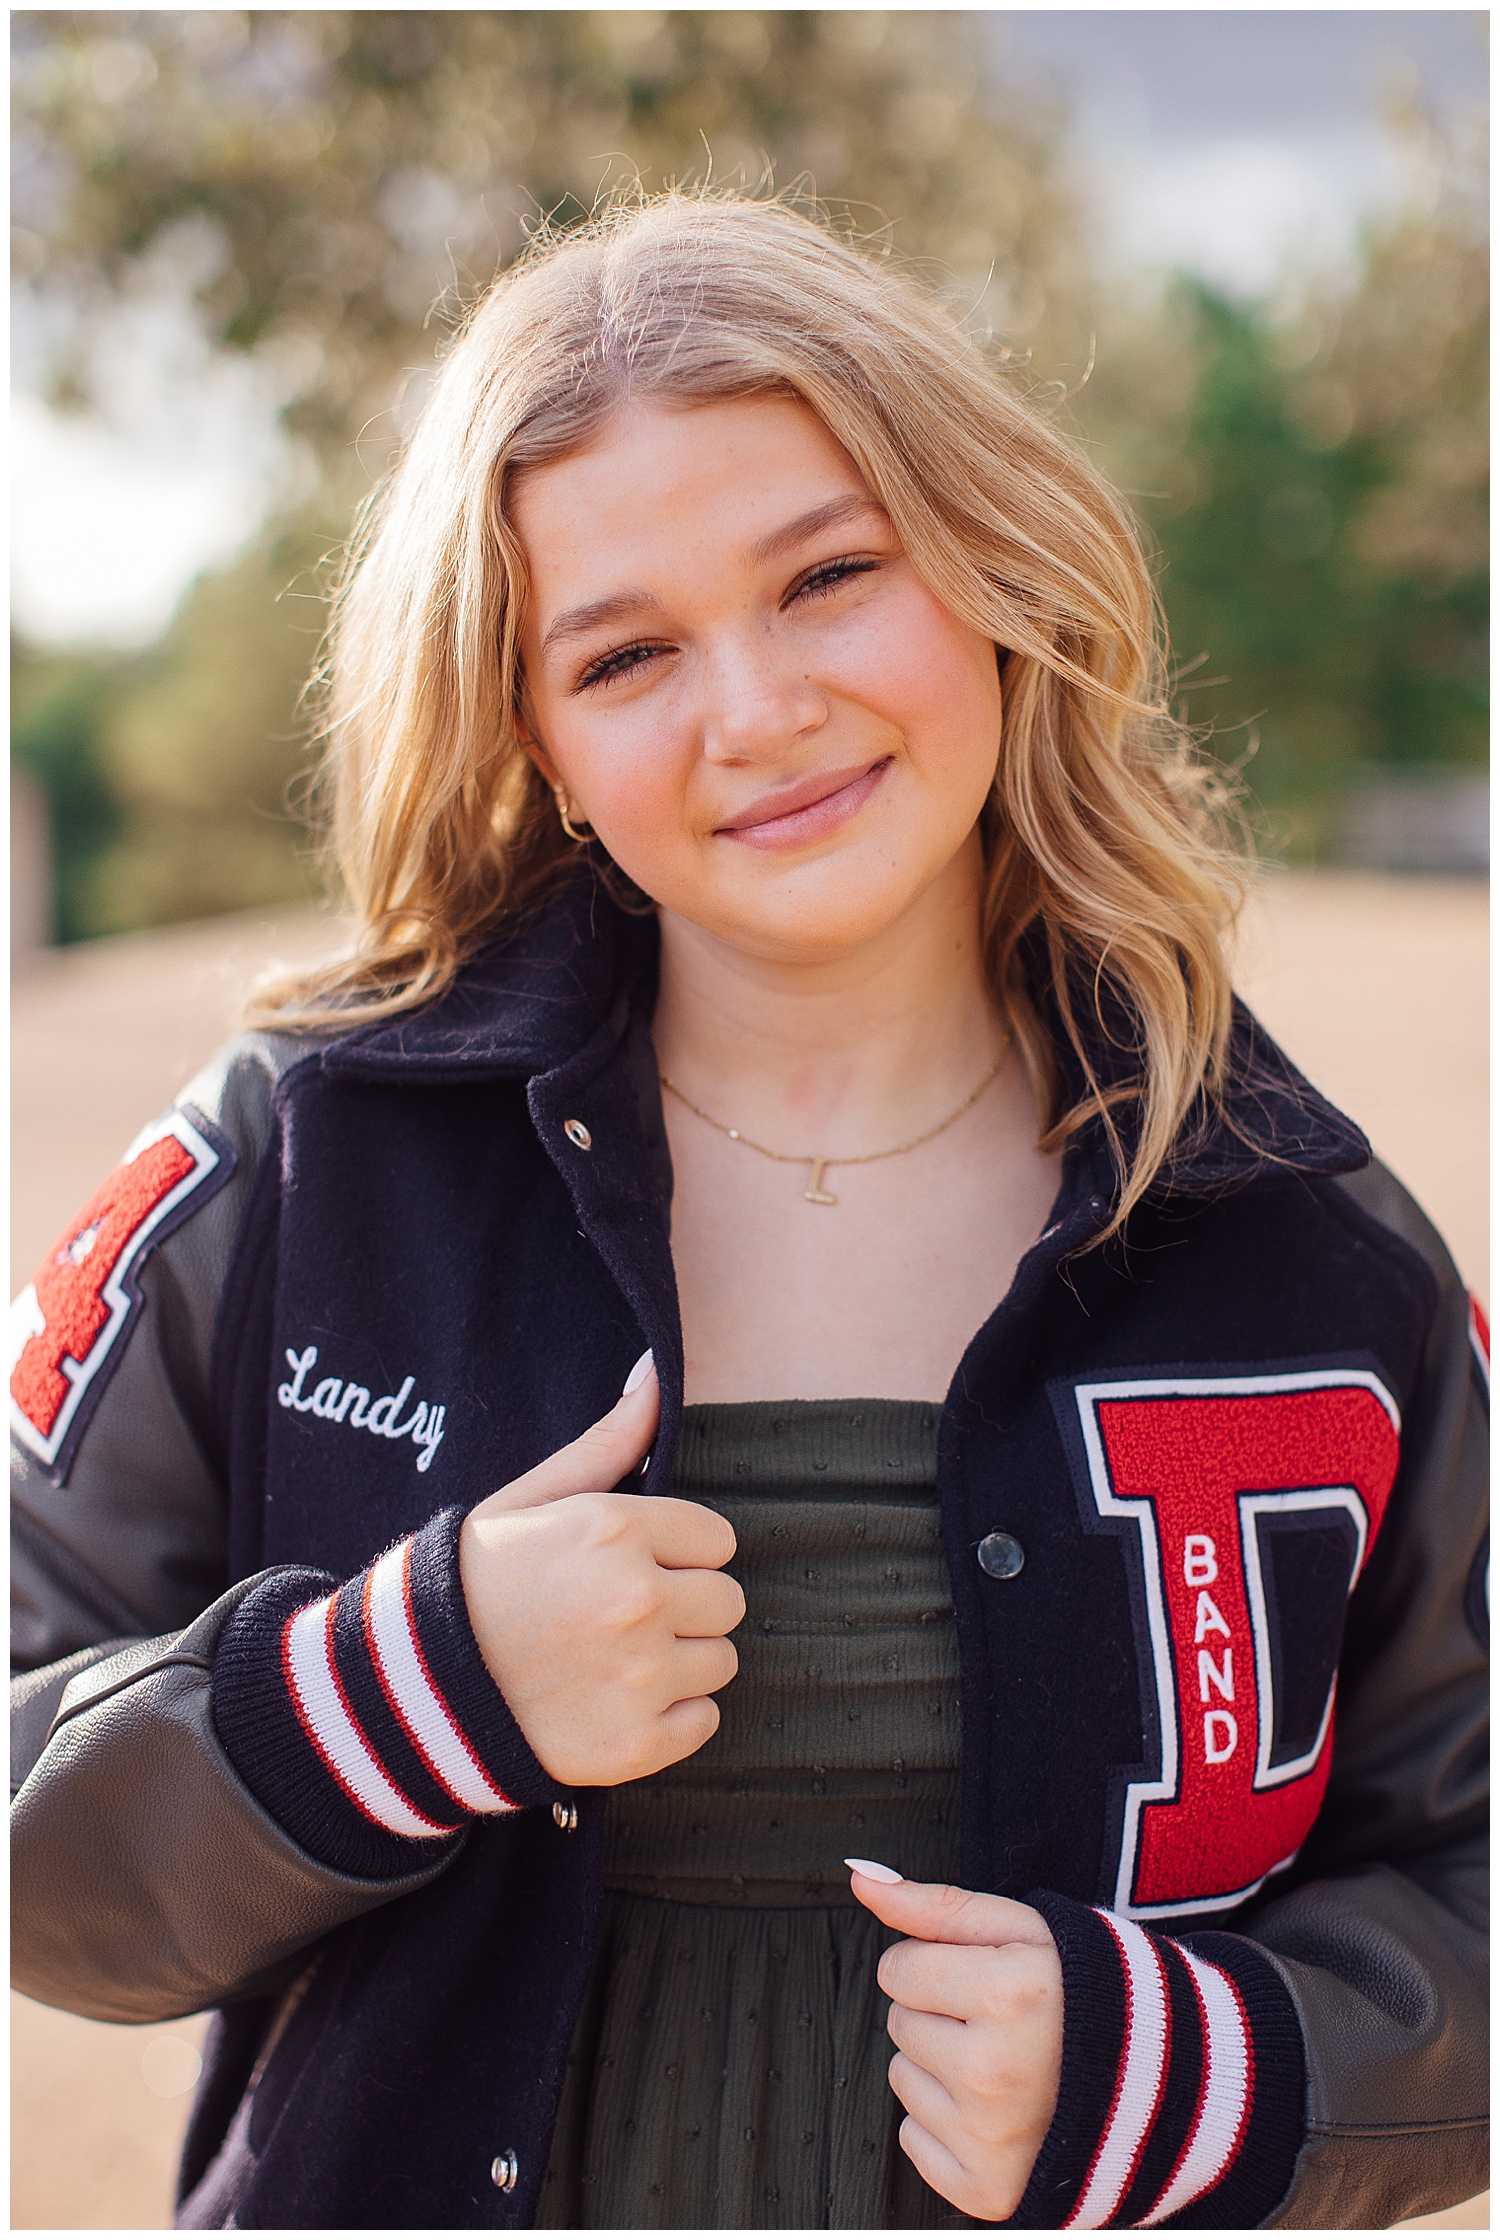 girl wearing navy and red letter jacket outdoors Houston and smiling